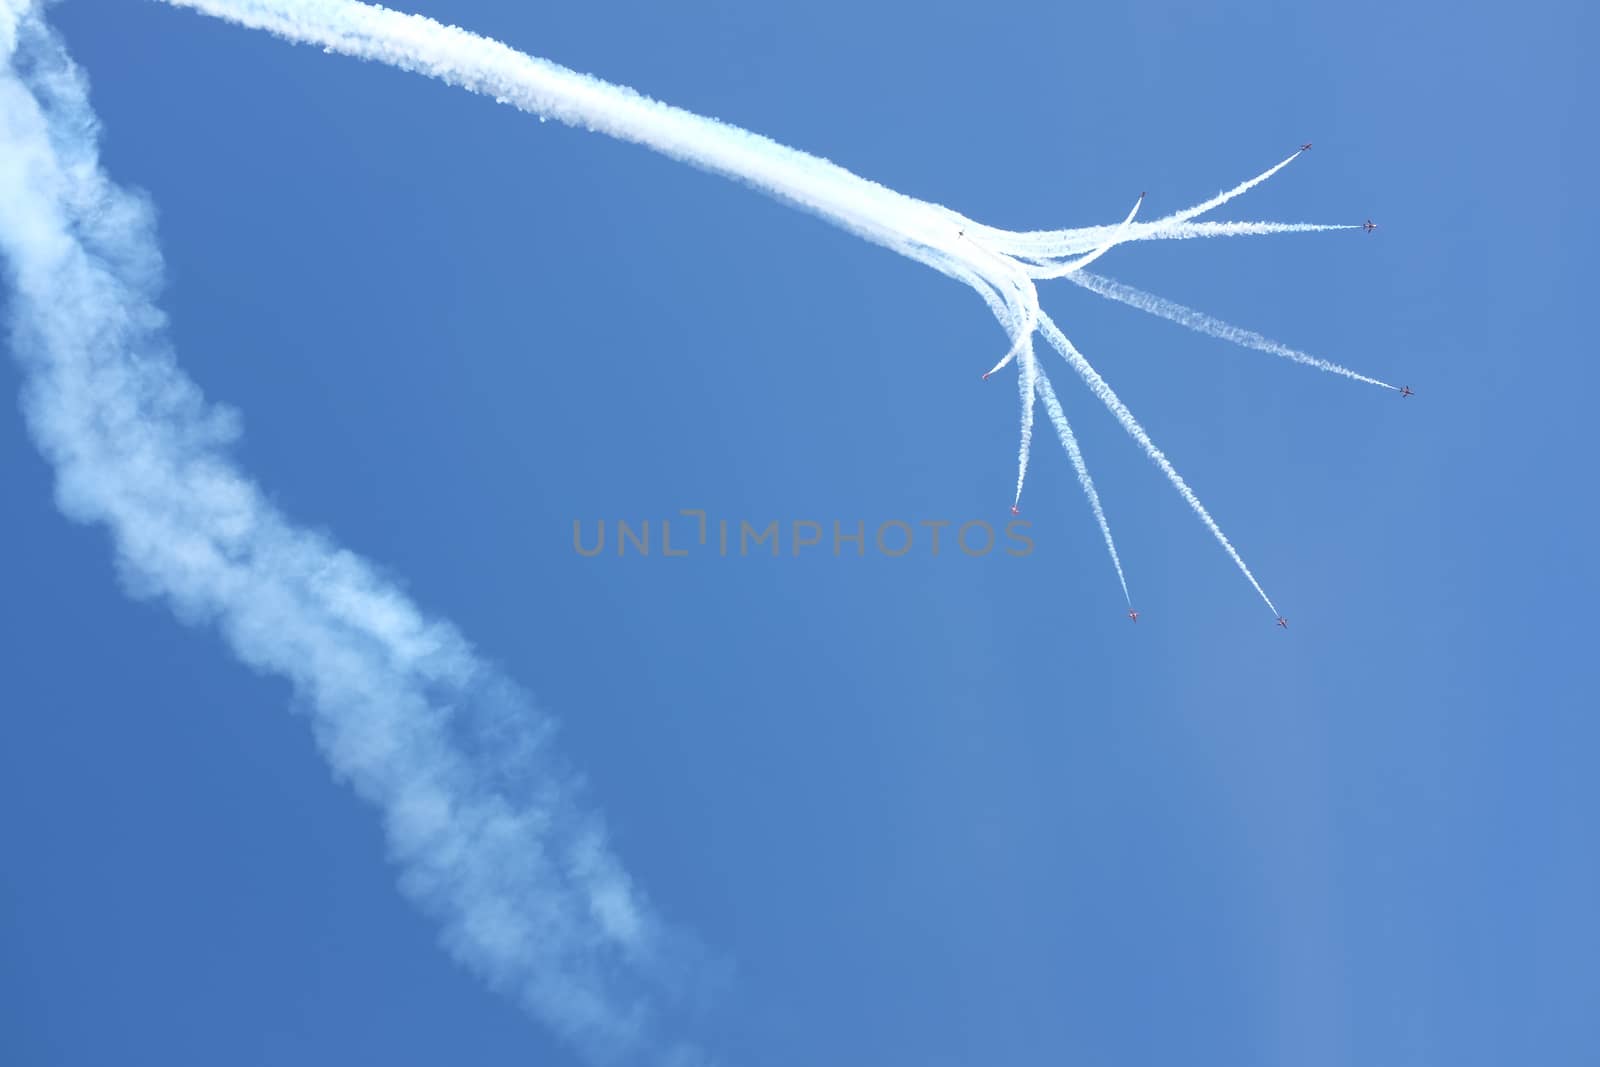 Vapour trails lead to a formation of red jet aircraft in display formation against a clear blue sky.